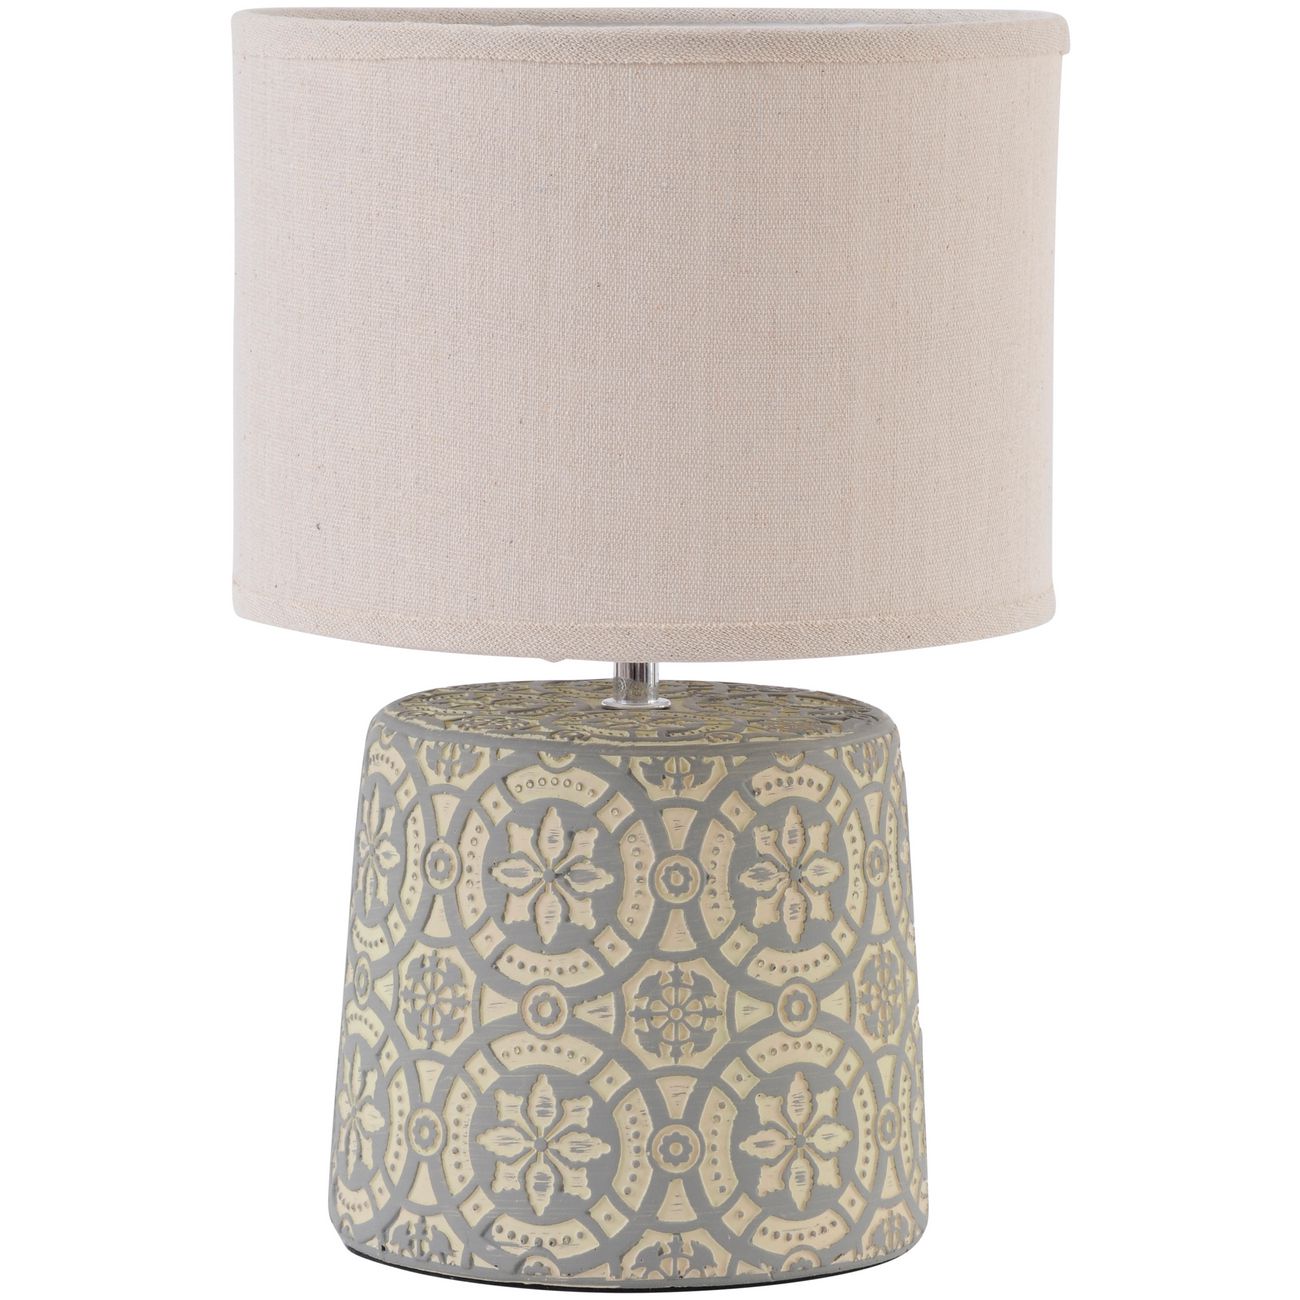 Vedder Cream Concrete Lamp With Geometric Pattern and Shade